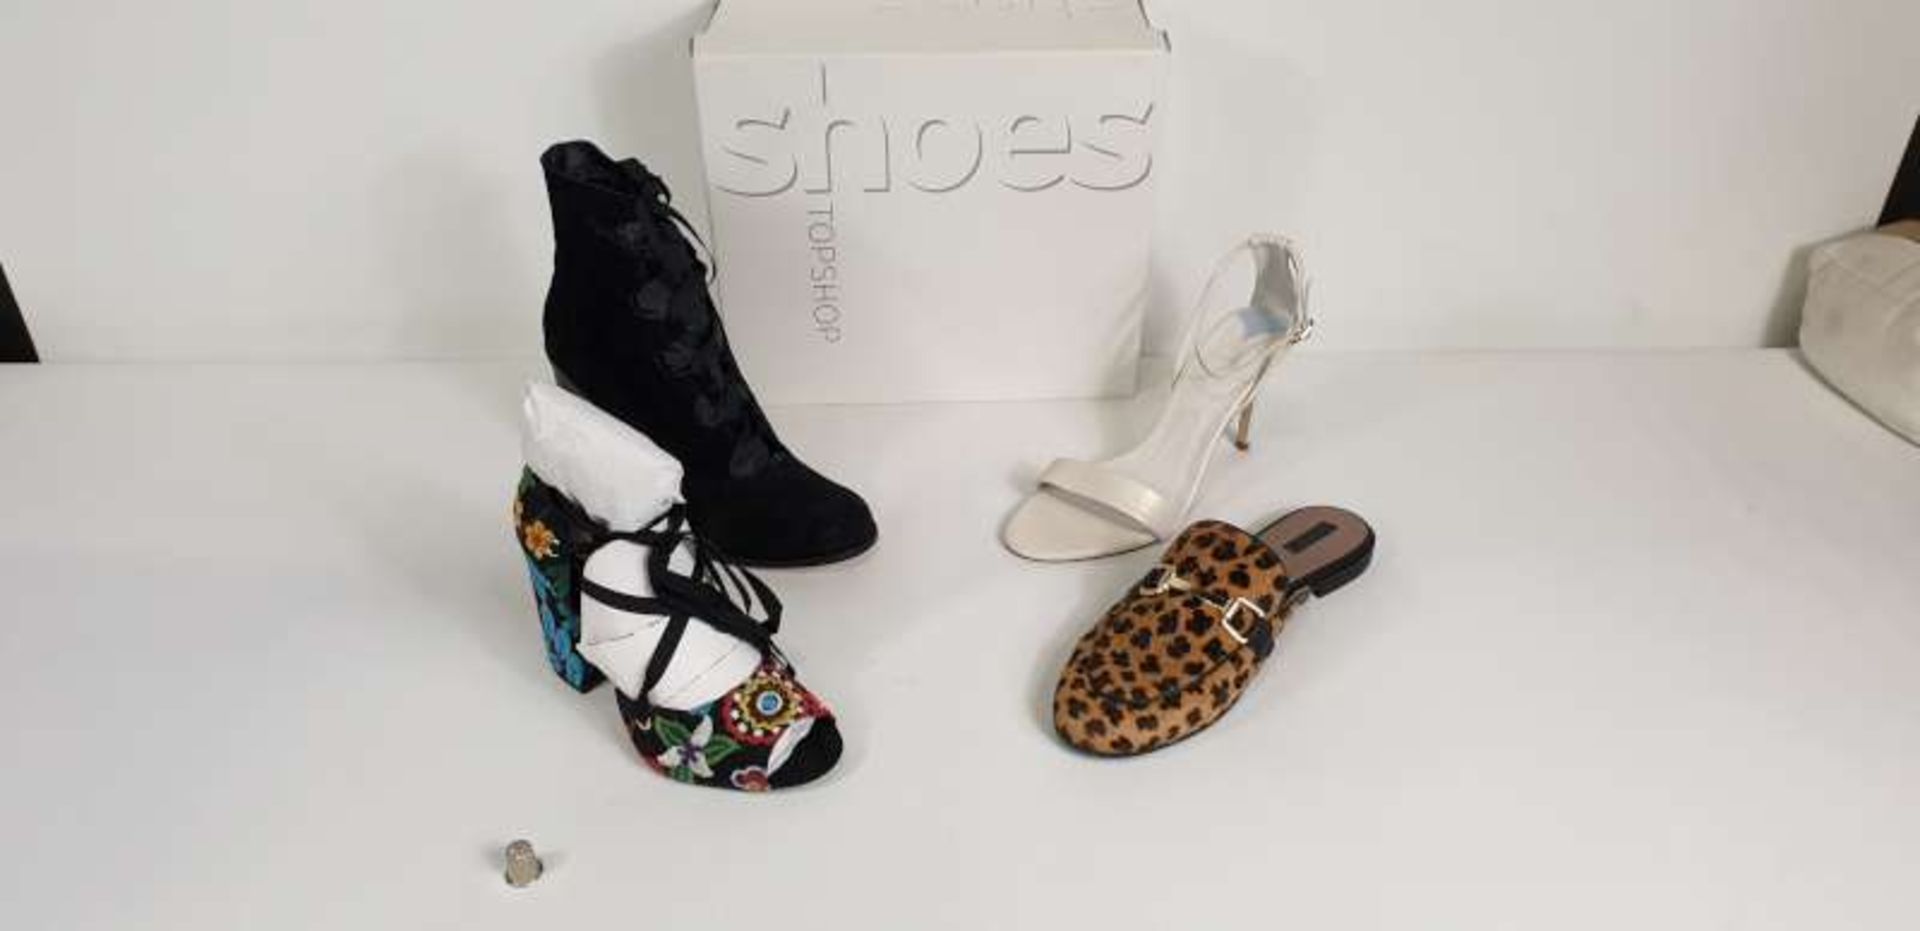 10 X BRAND NEW BOXED LADIES TOP SHOP SHOES IN VARIOUS STYLES AND SIZES TOTAL RRP £400 - £500